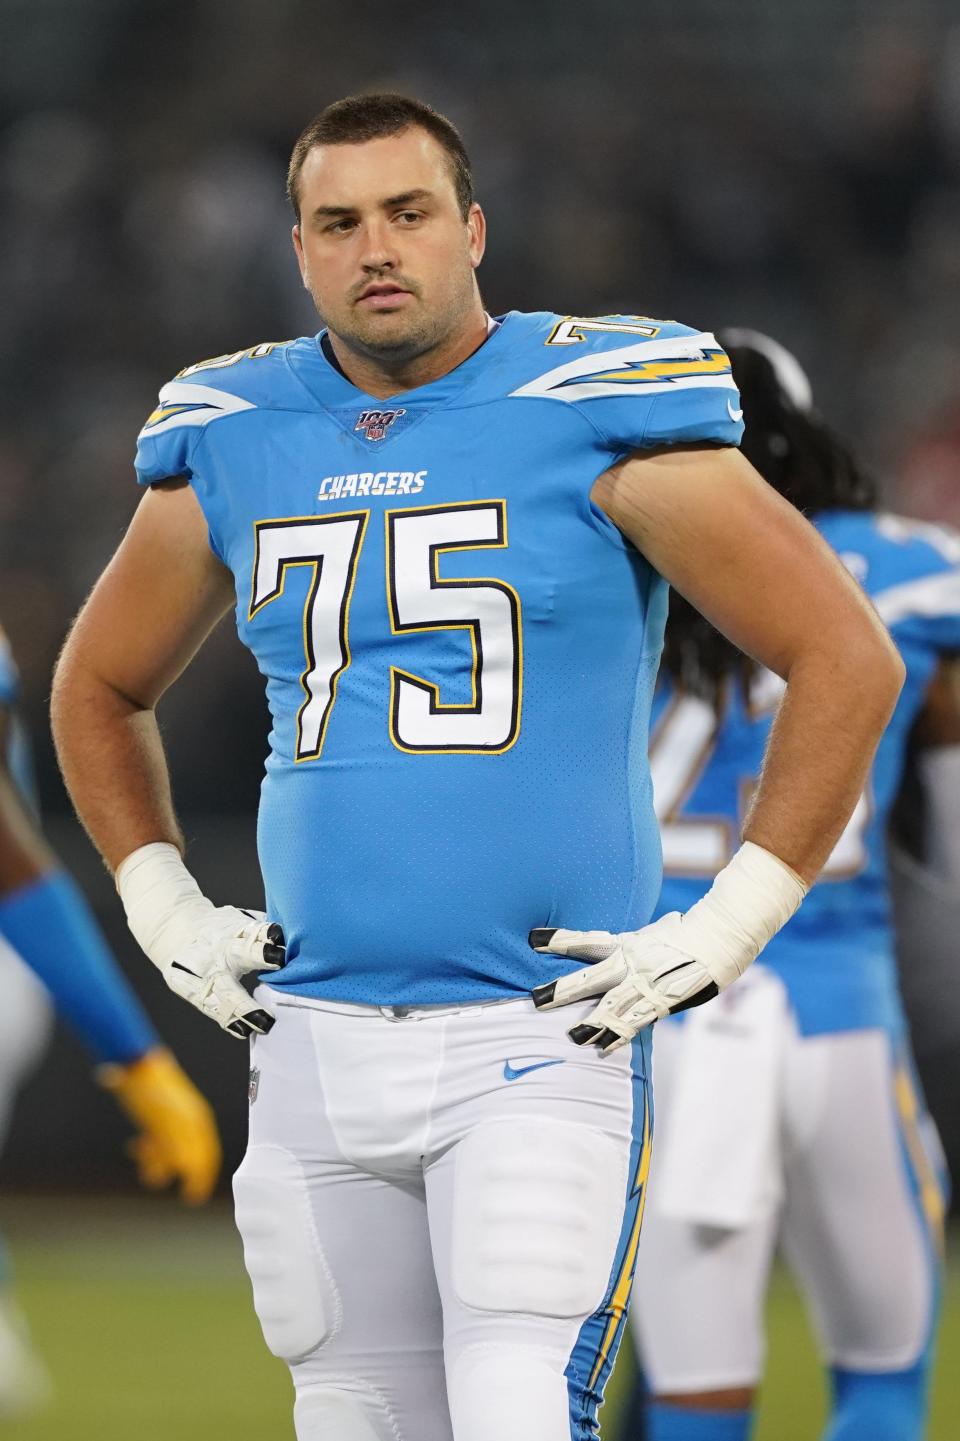 Michael Schofield has started 81 games in his career, including 12 last season as the right guard of the Los Angeles Chargers.